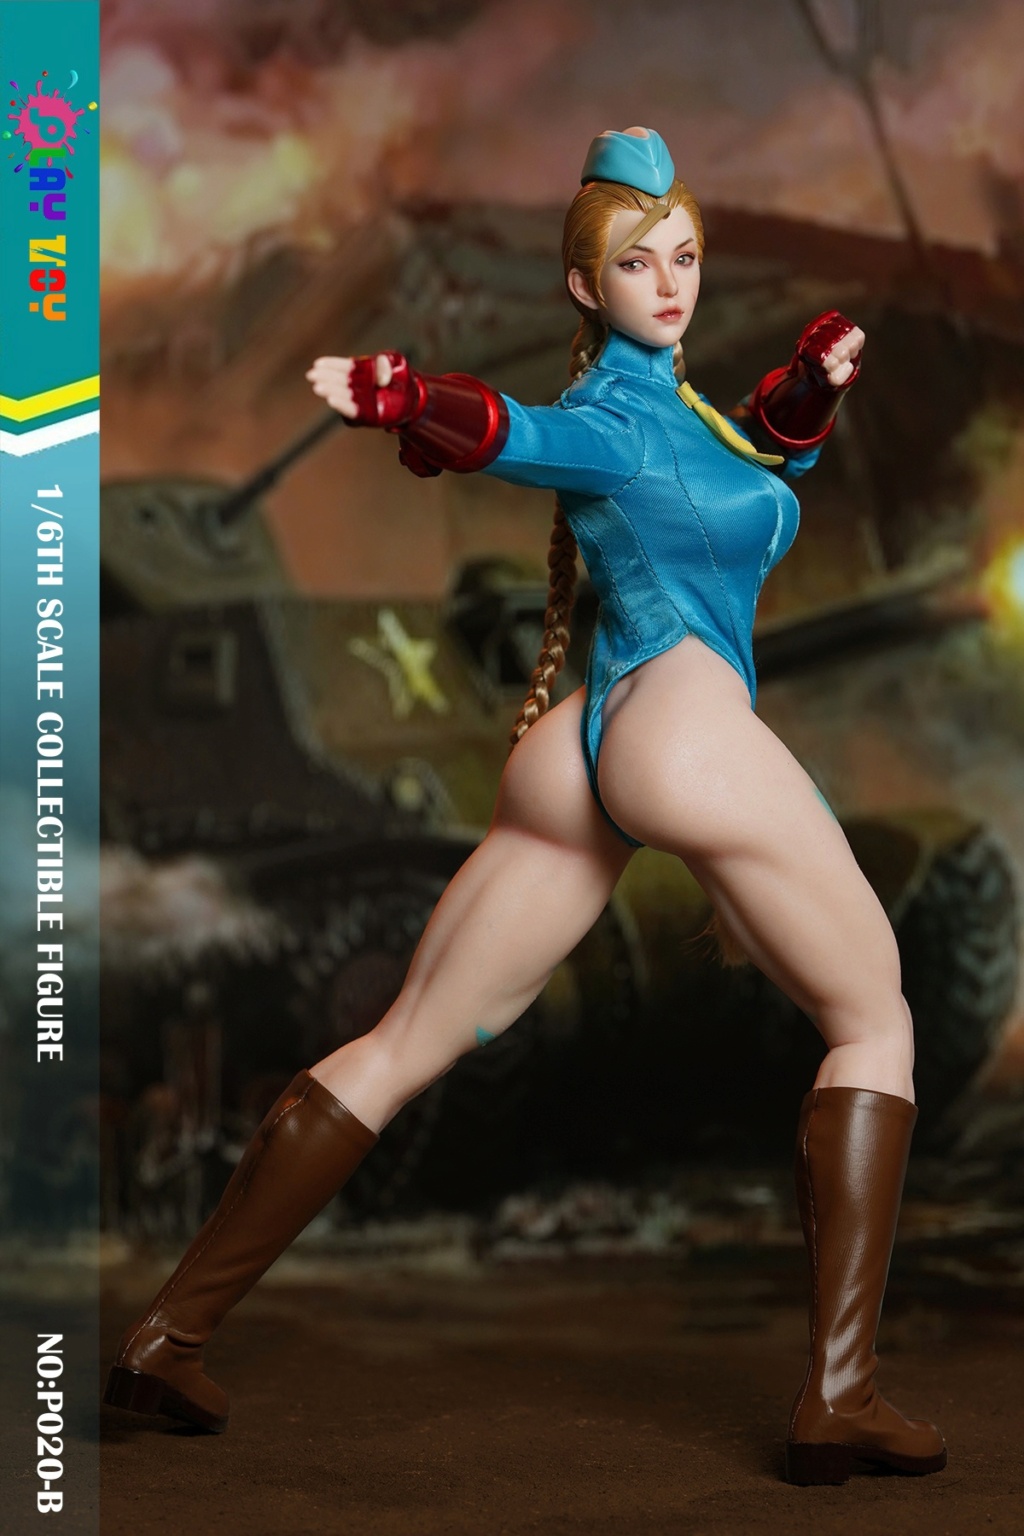 newproduct - NEW PRODUCT: Play Toy: P020 1/6 Scale Female Fighter in 2 styles 11442511